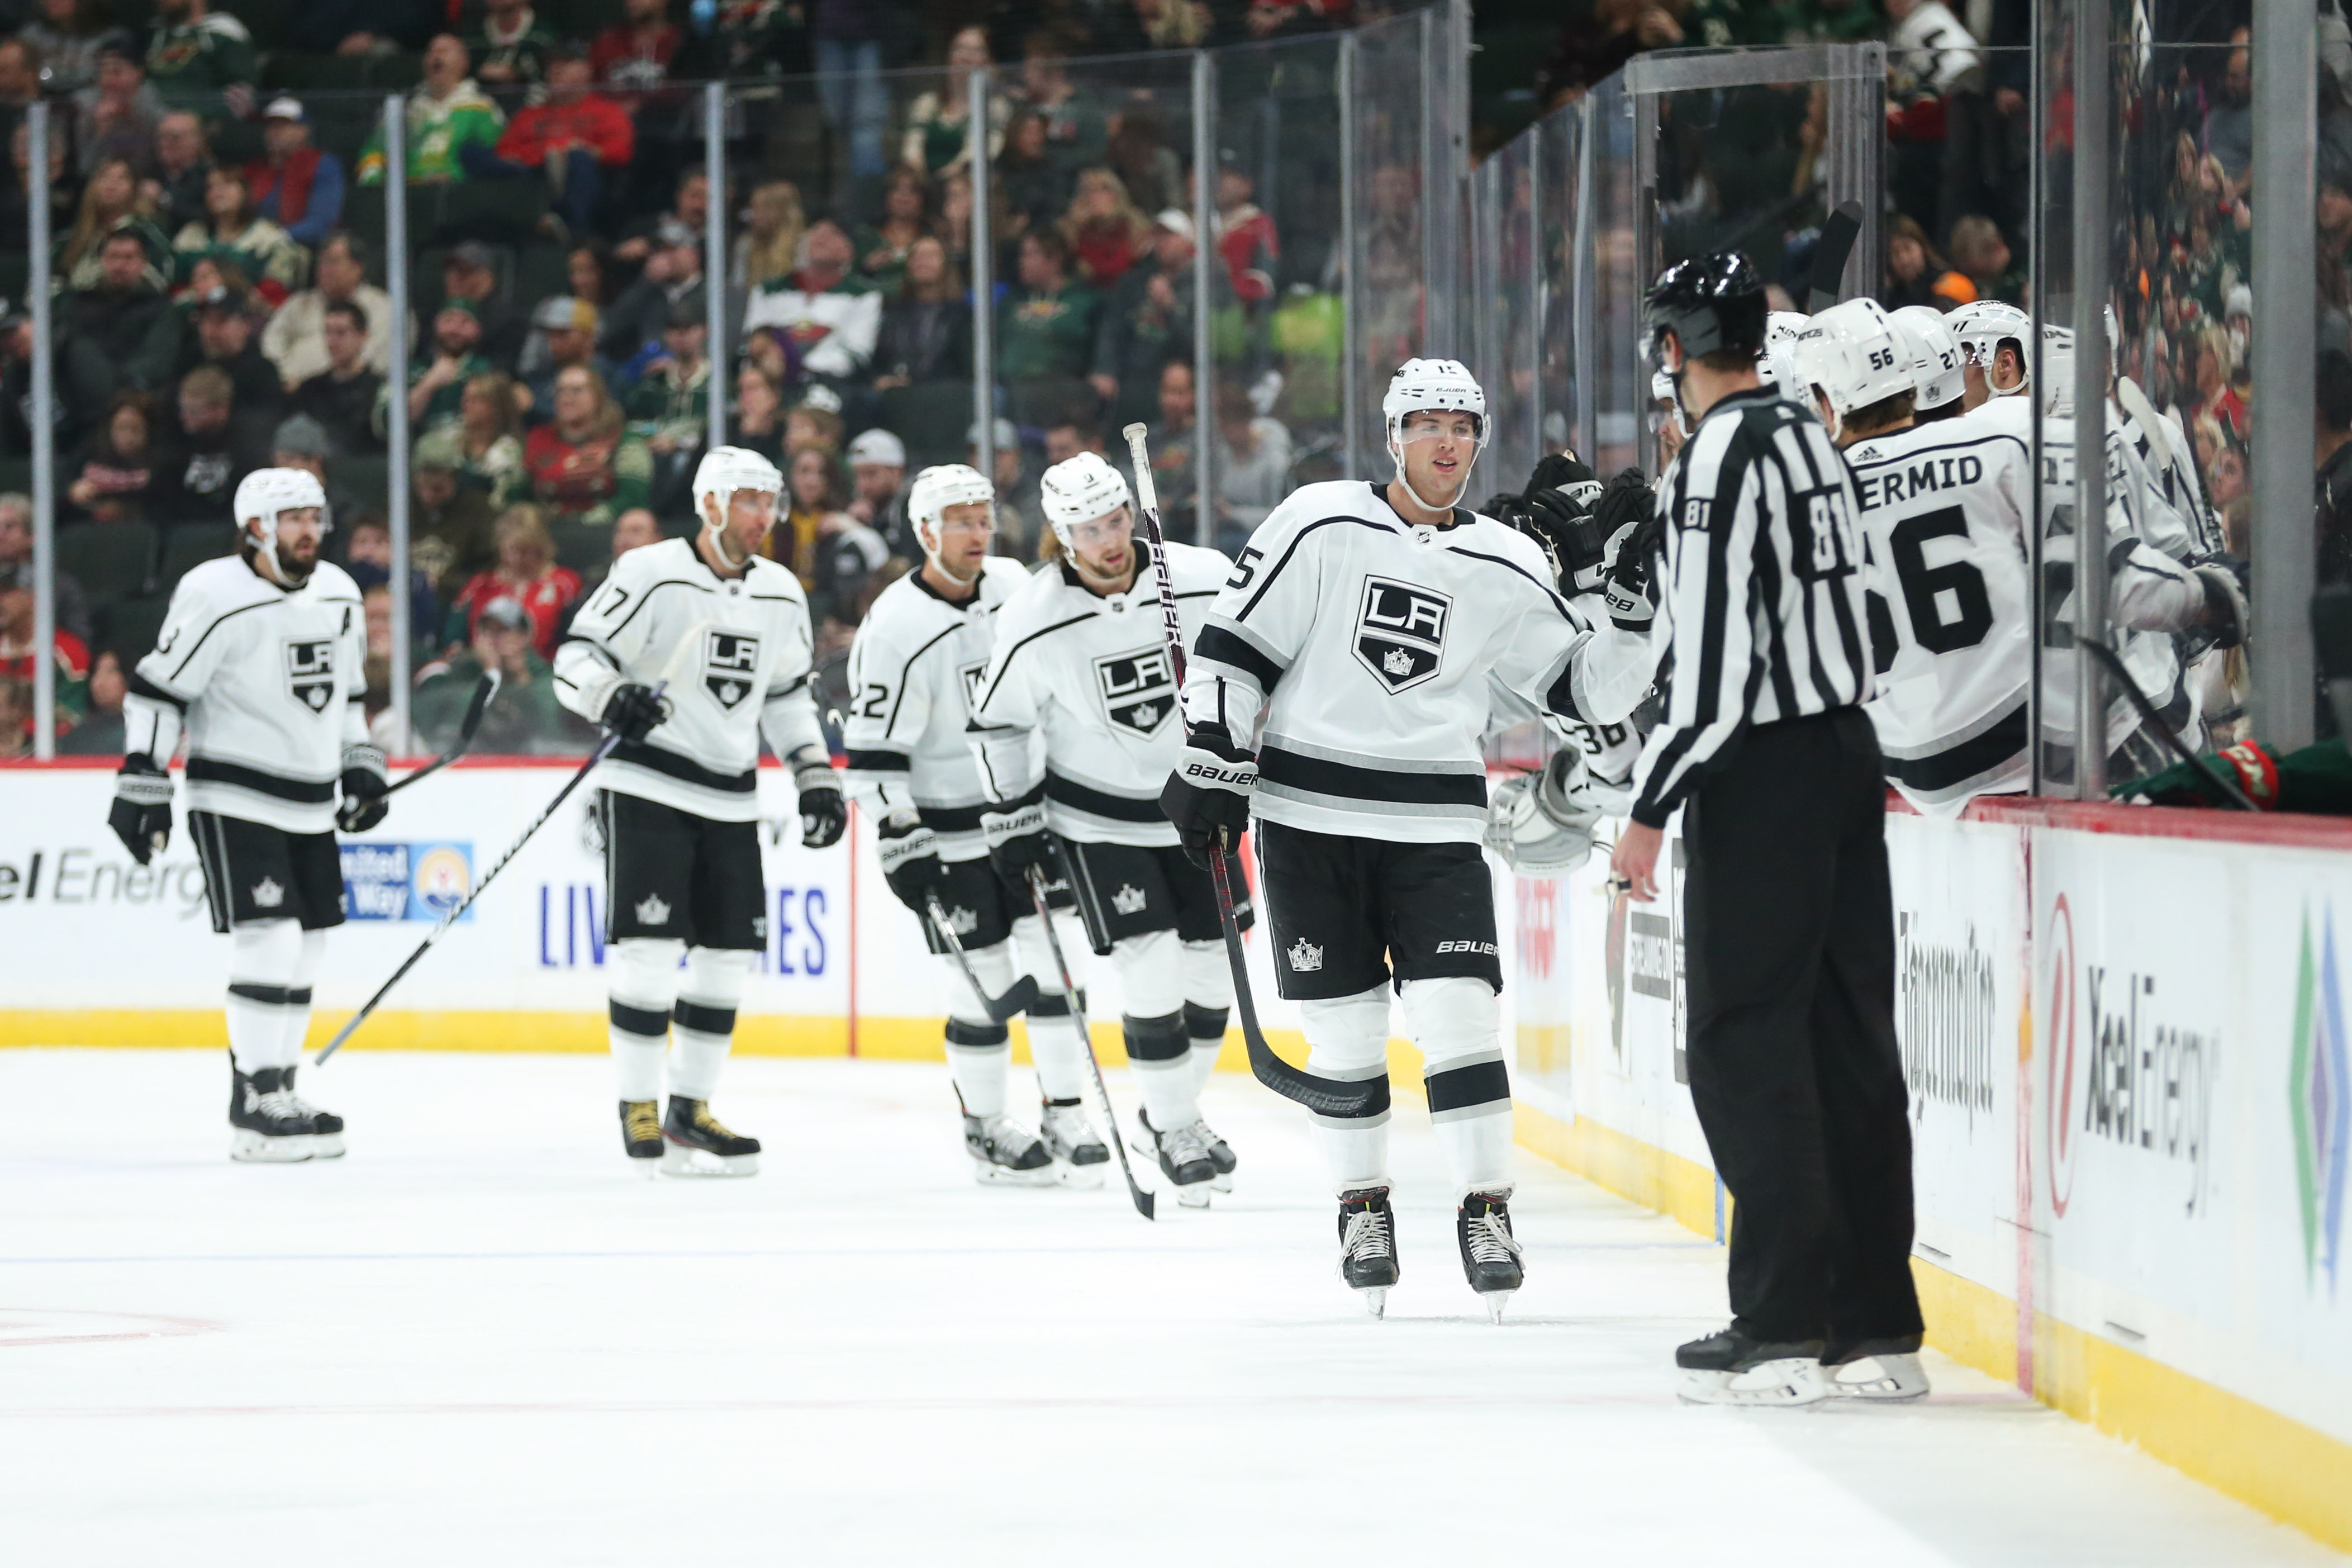 Los Angeles Kings defenseman Ben Hutton (15) celebrates with teammates after scoring a goal against the Minnesota Wild during the second period at Xcel Energy Center.